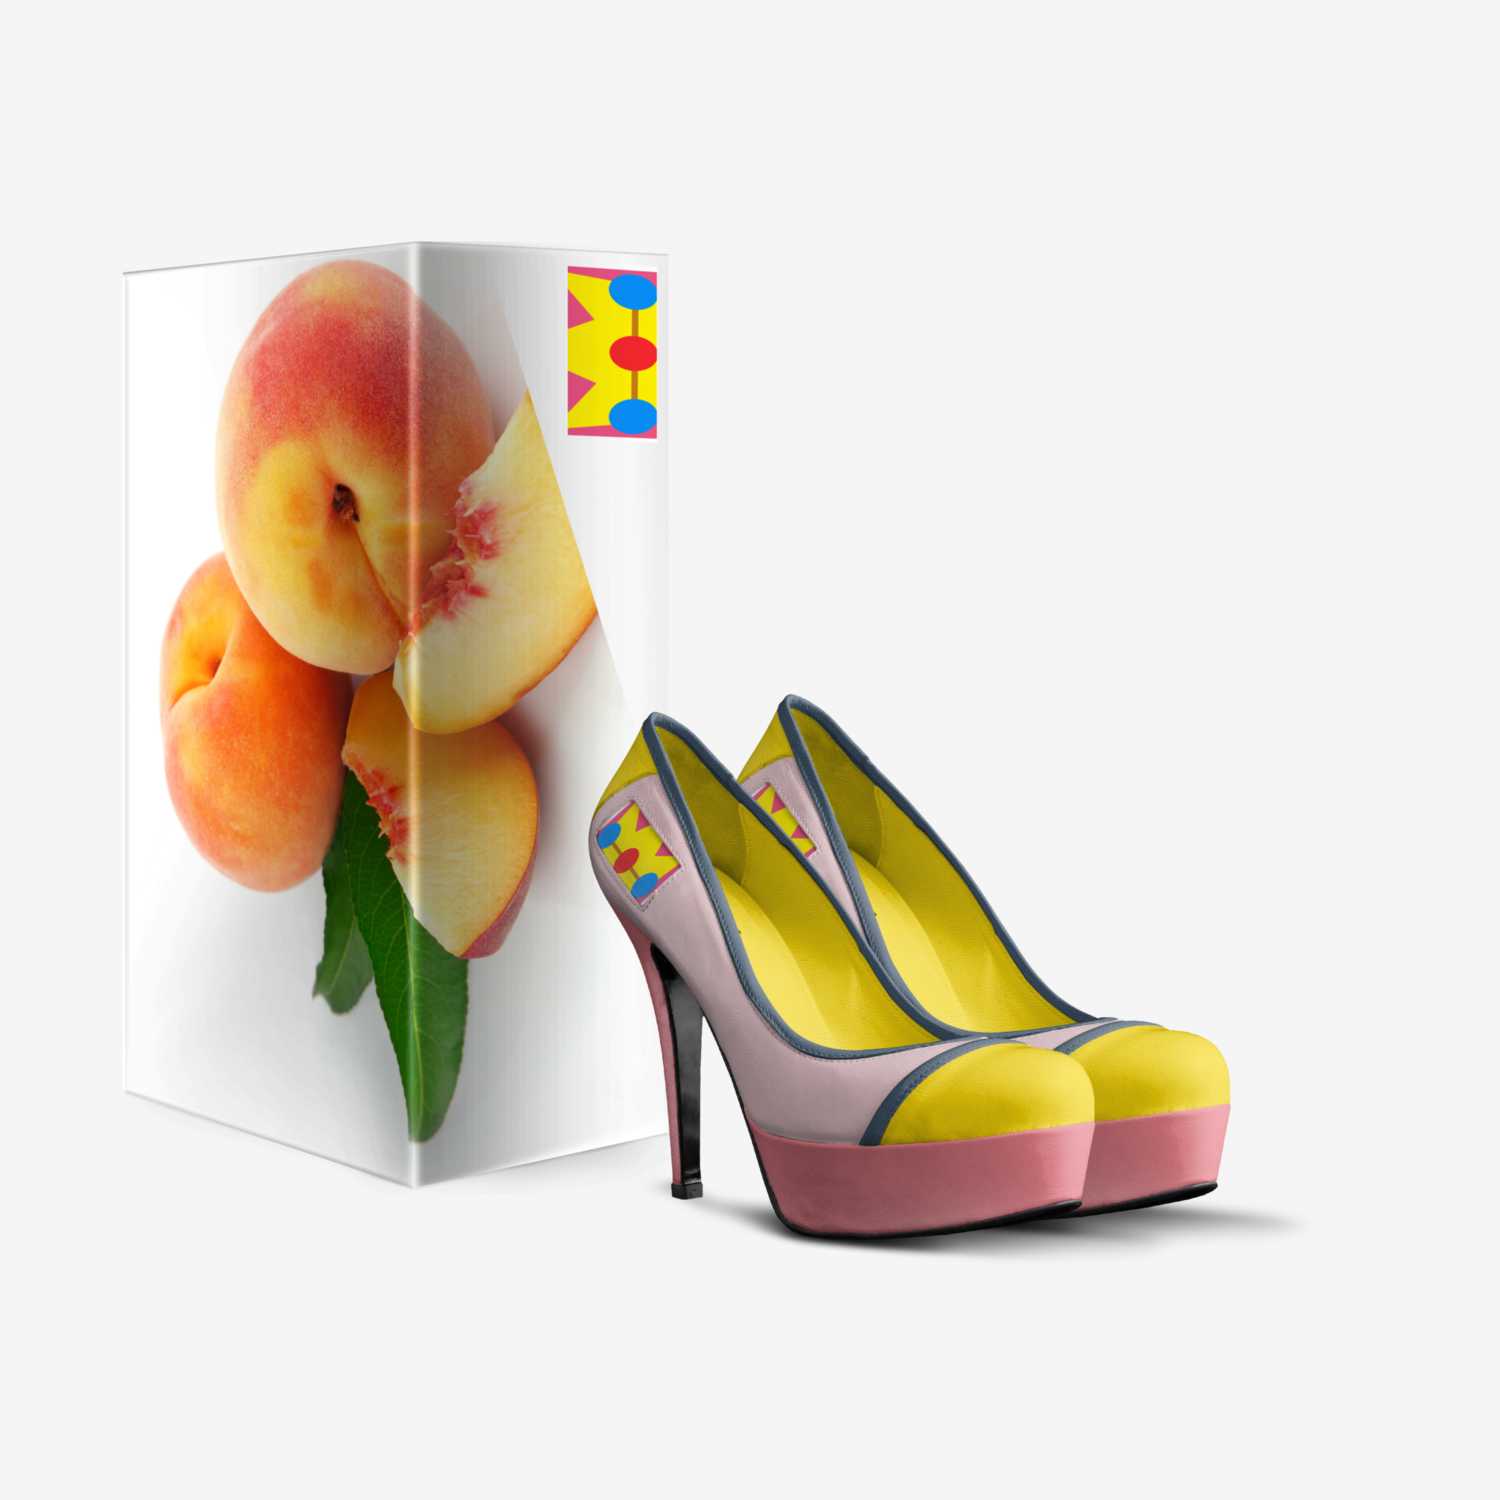 Peach Princess custom made in Italy shoes by Blackluxmatters | Box view